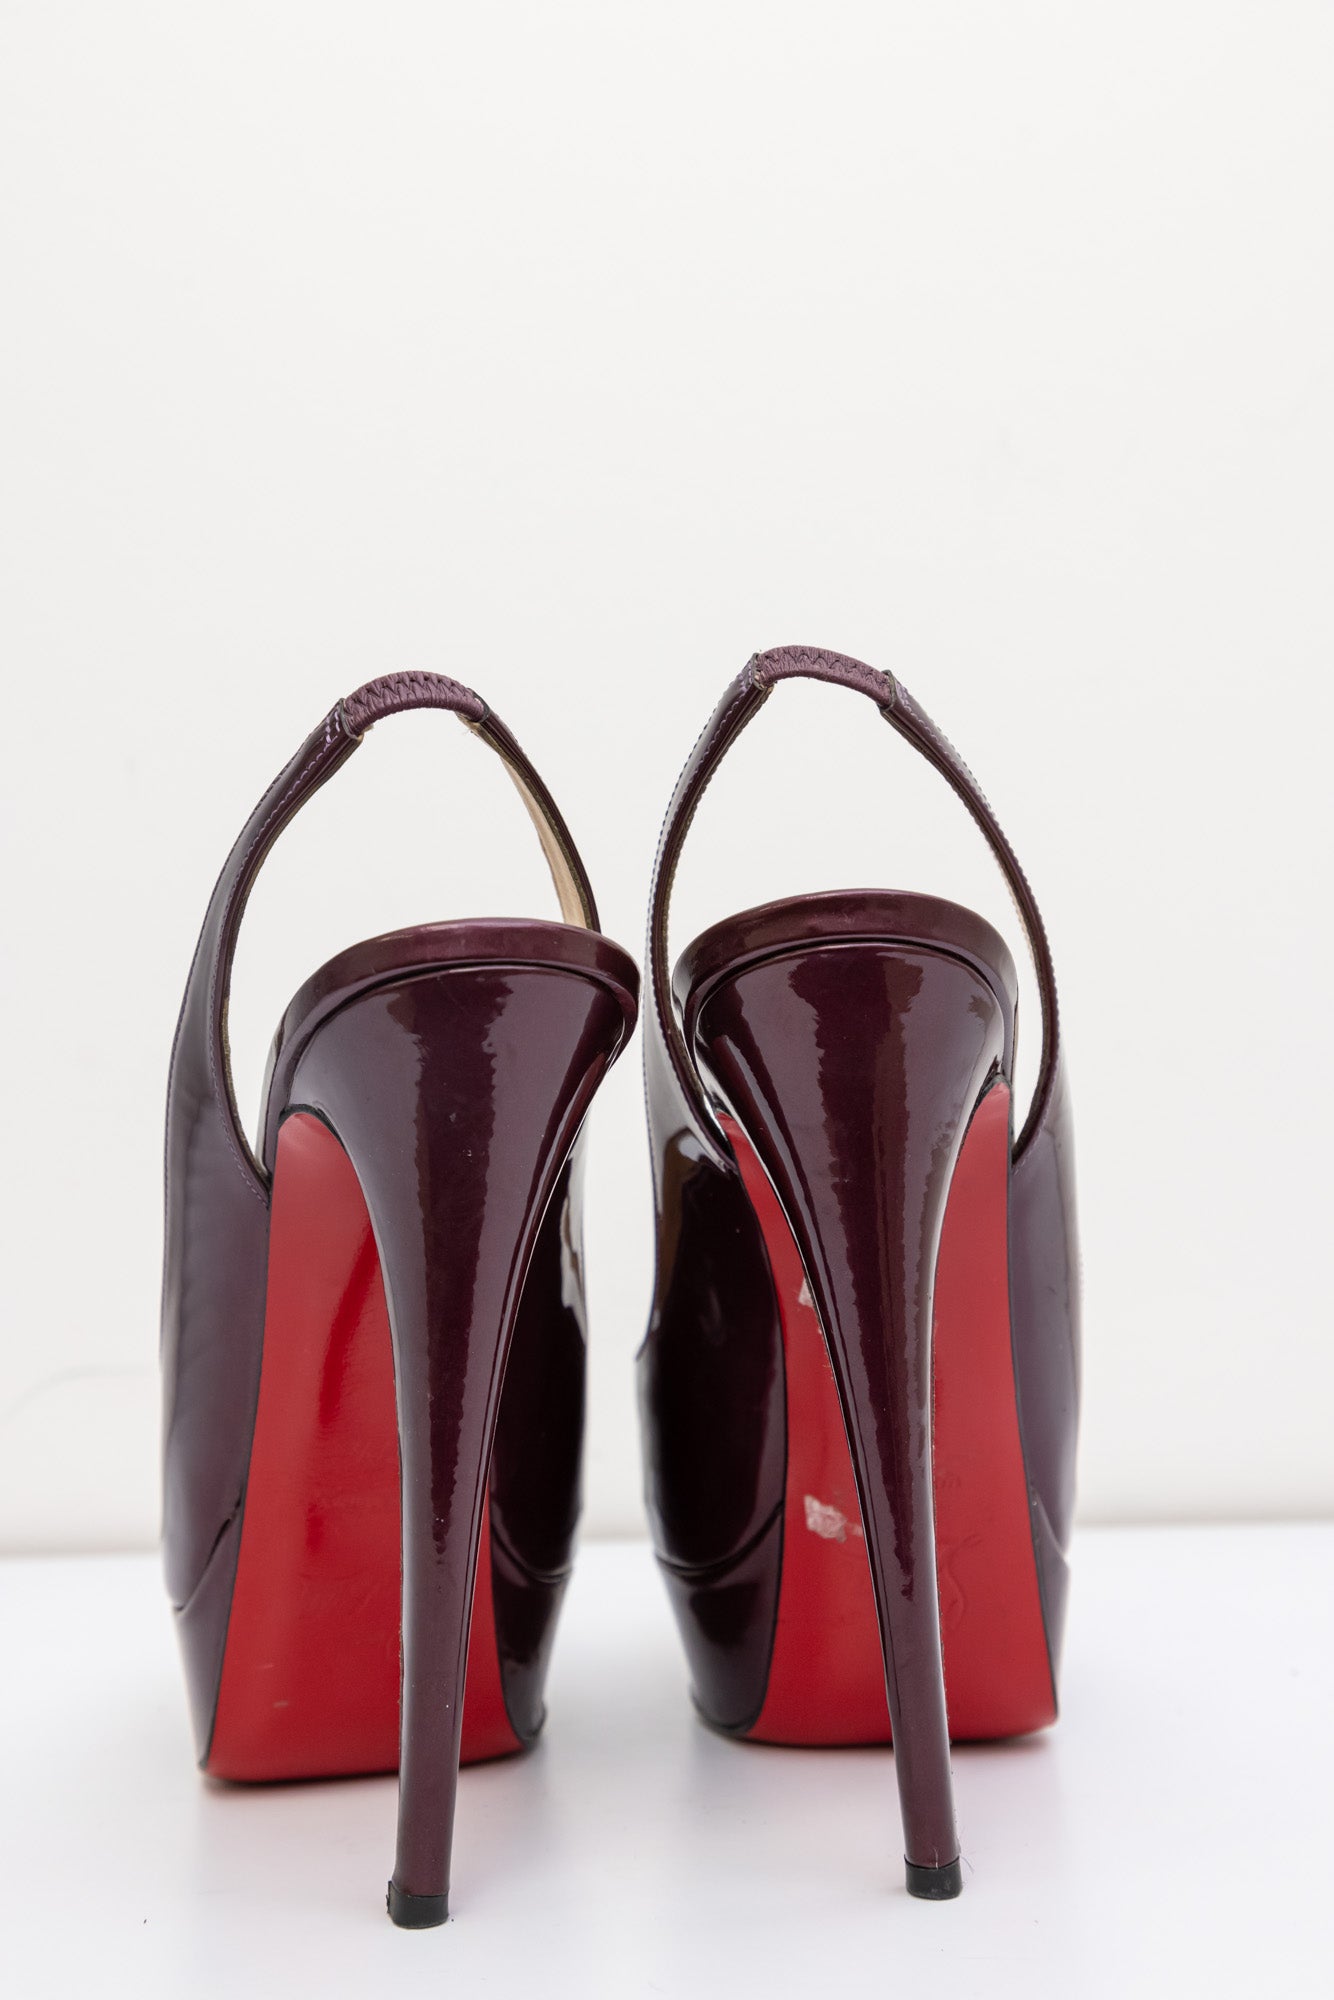 CHRISTIAN LOUBOUTIN Cathay Oxblood Patent Pumps